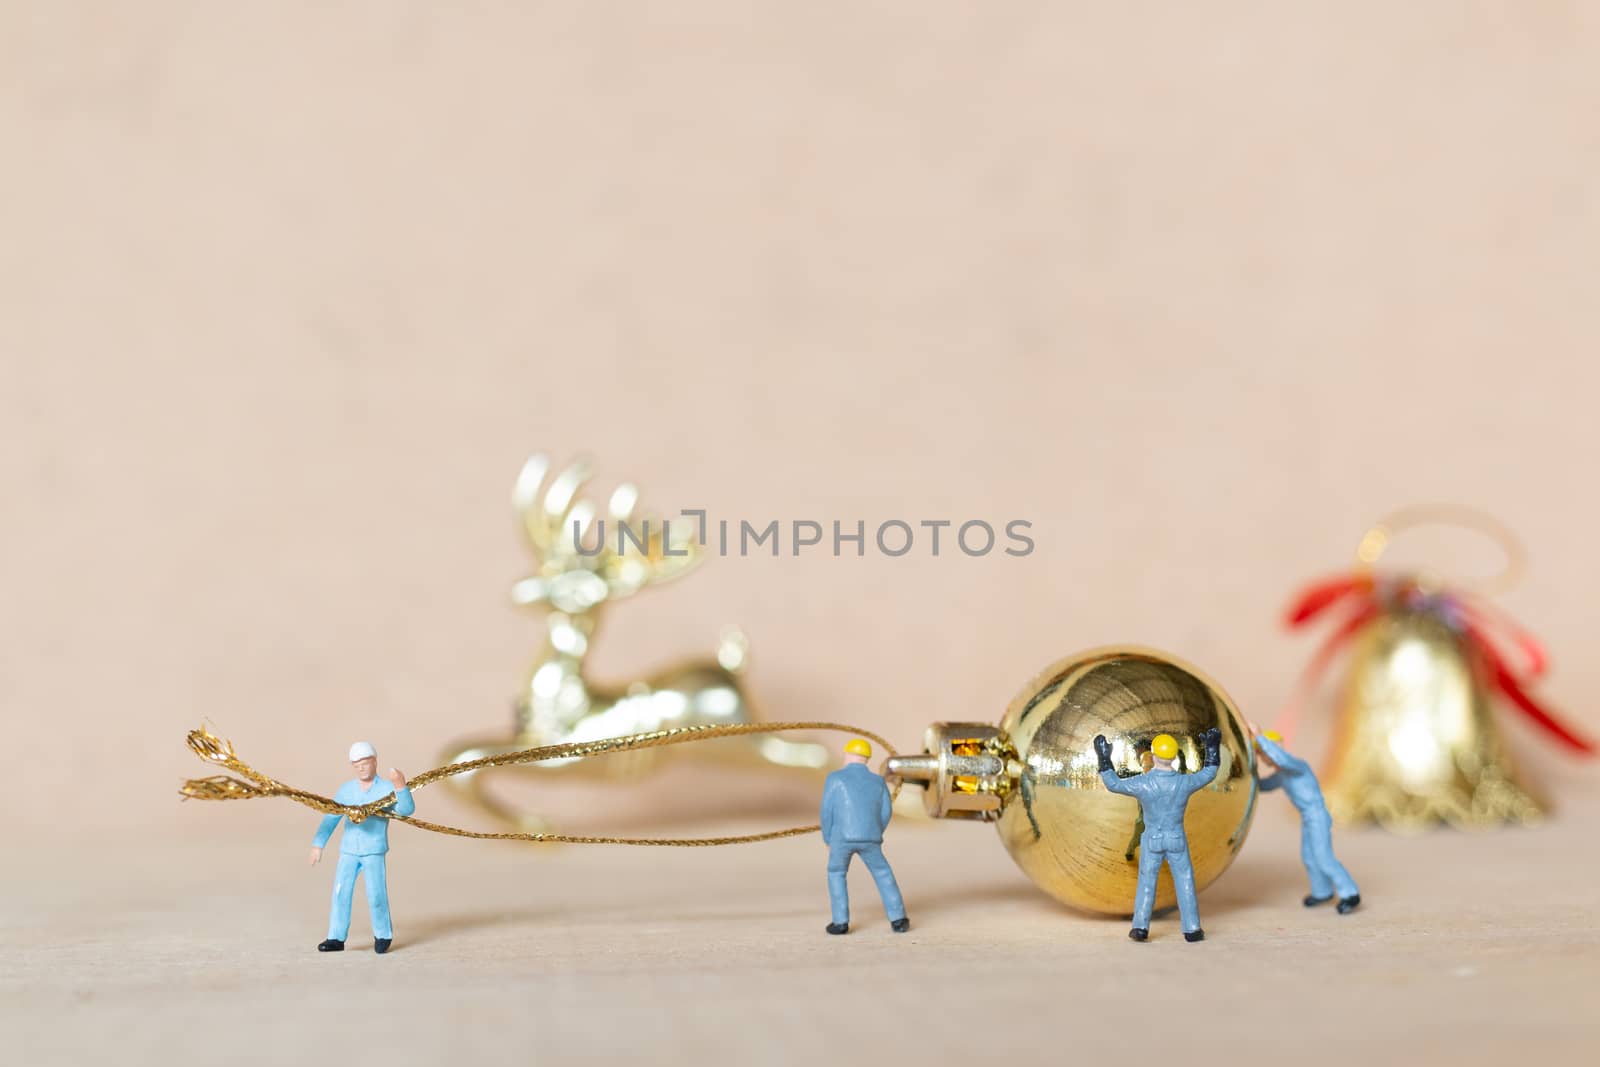 Miniature people,  Worker team working with a Christmas decorati by sirichaiyaymicro